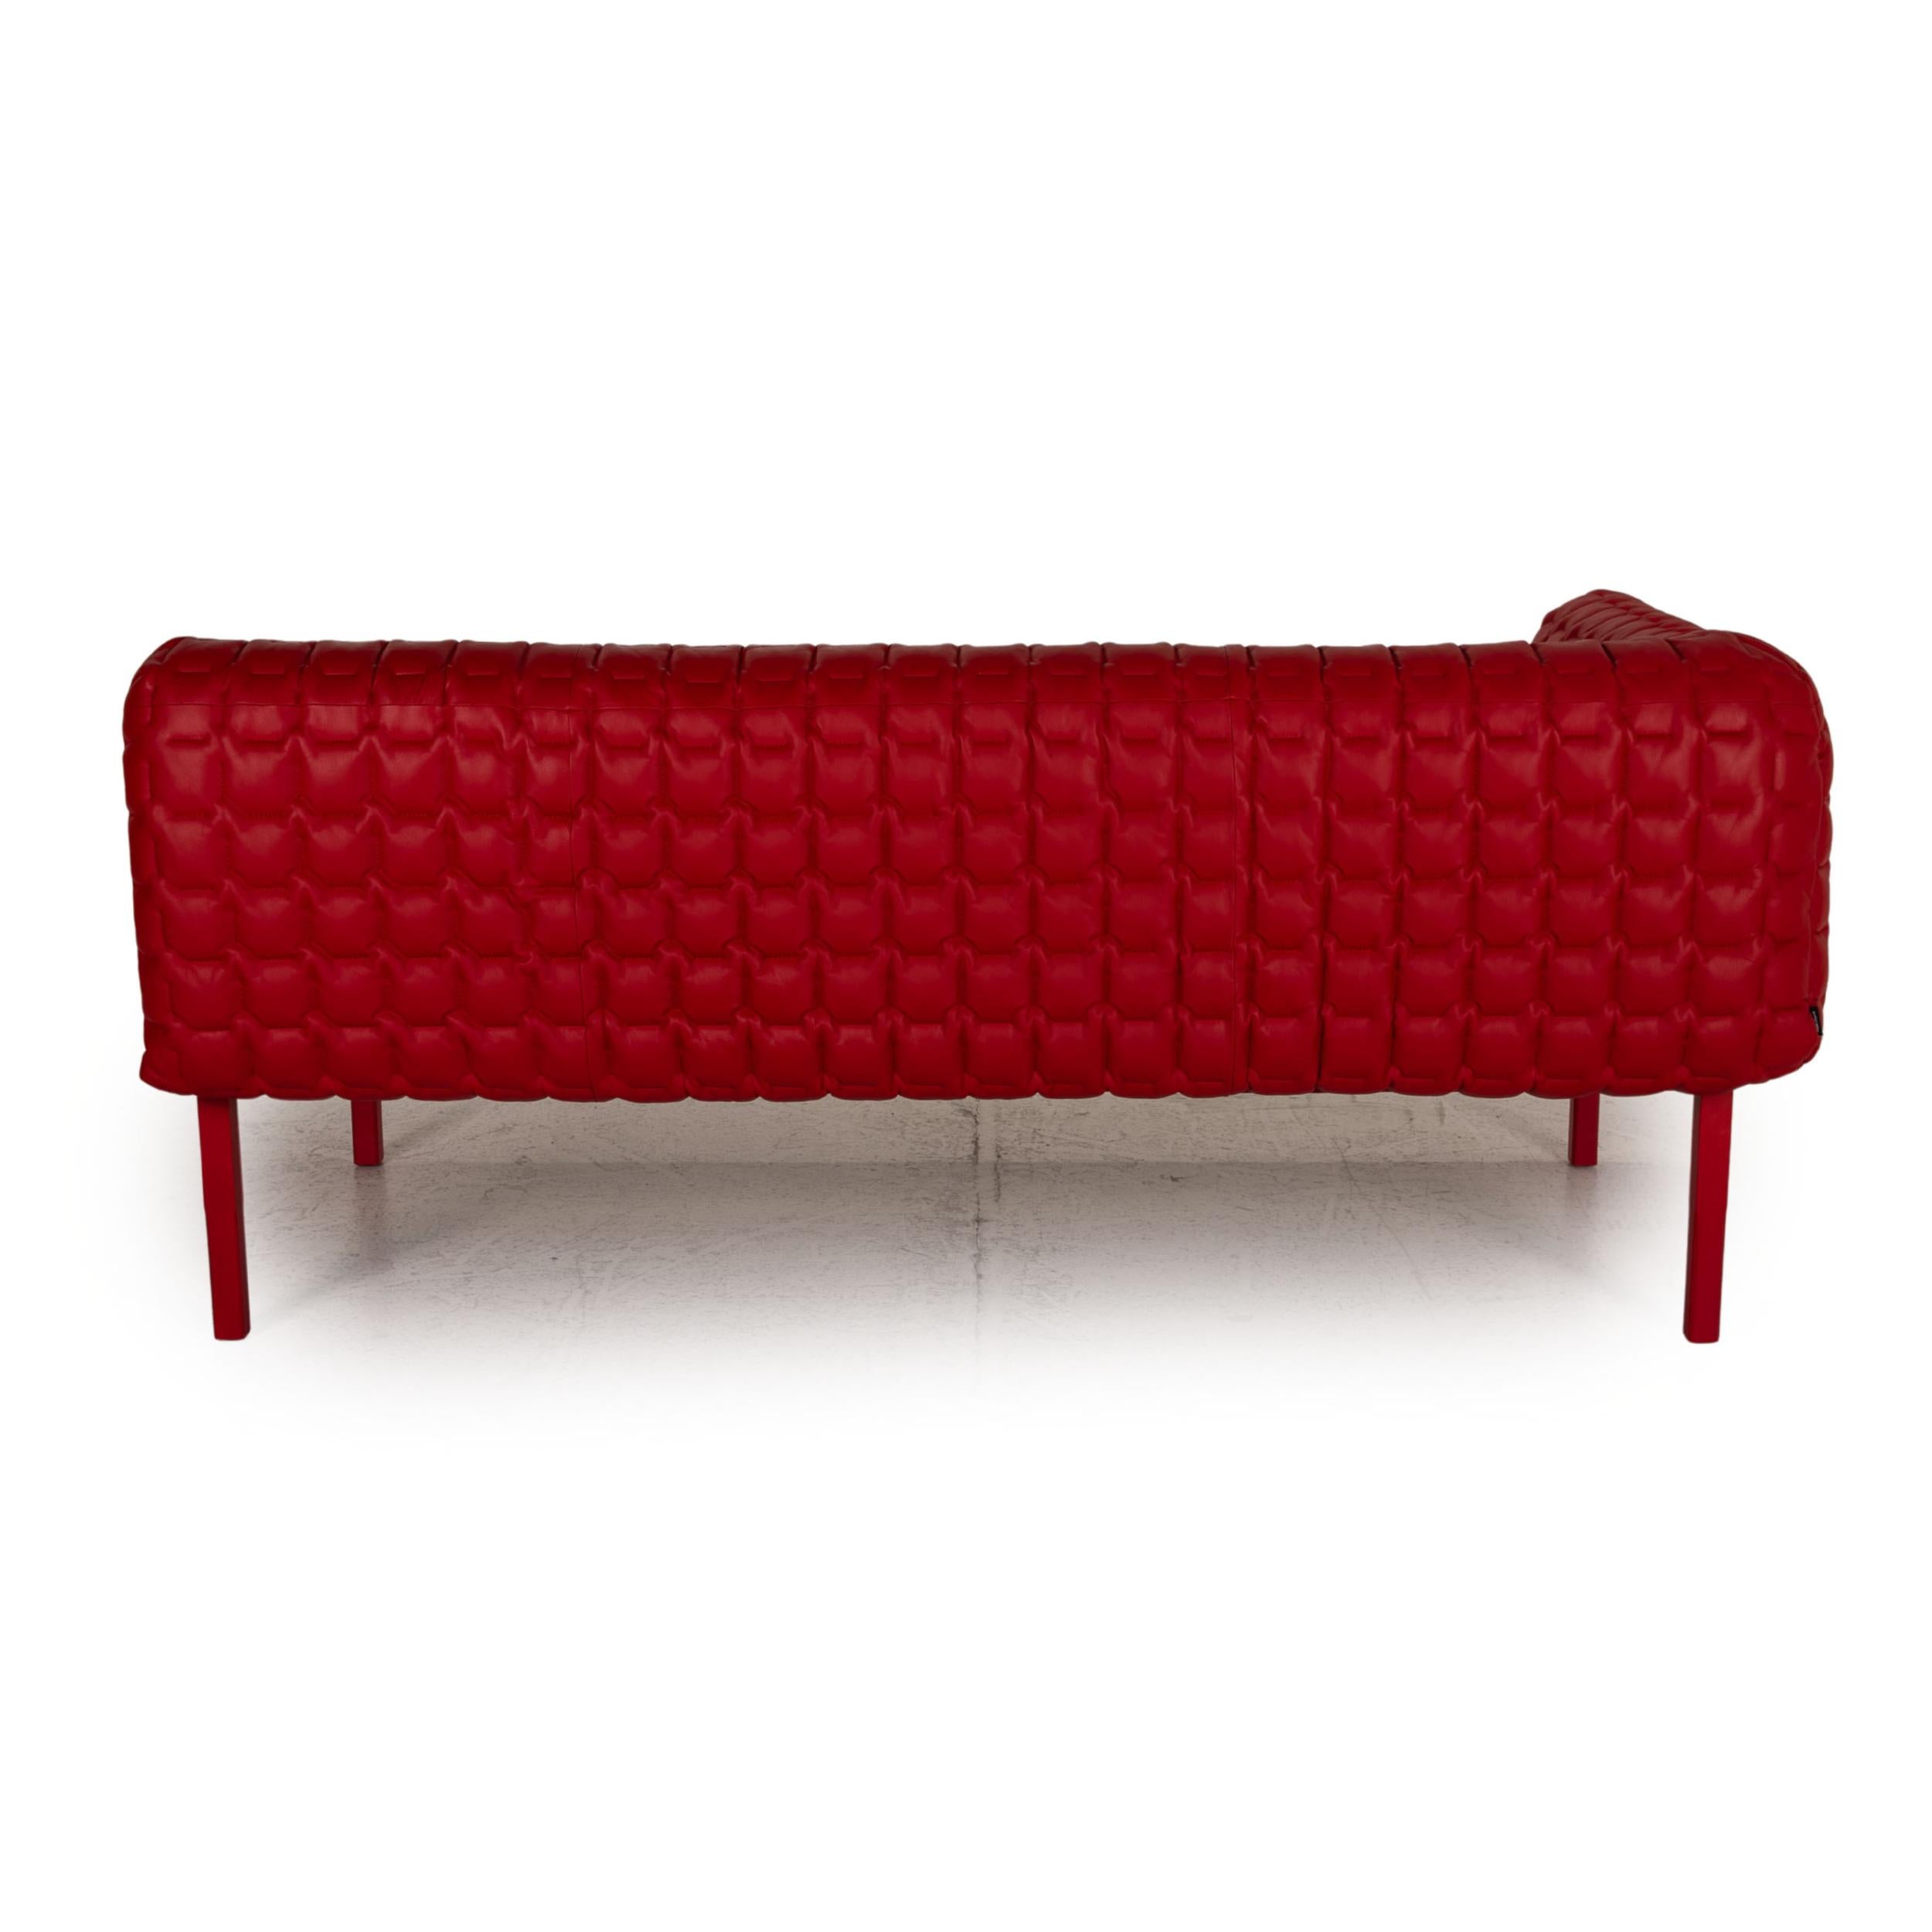 Contemporary Ligne Roset Ruché Leather Lounger Red Sofa Couch Meridienne Chaise Longue For Sale